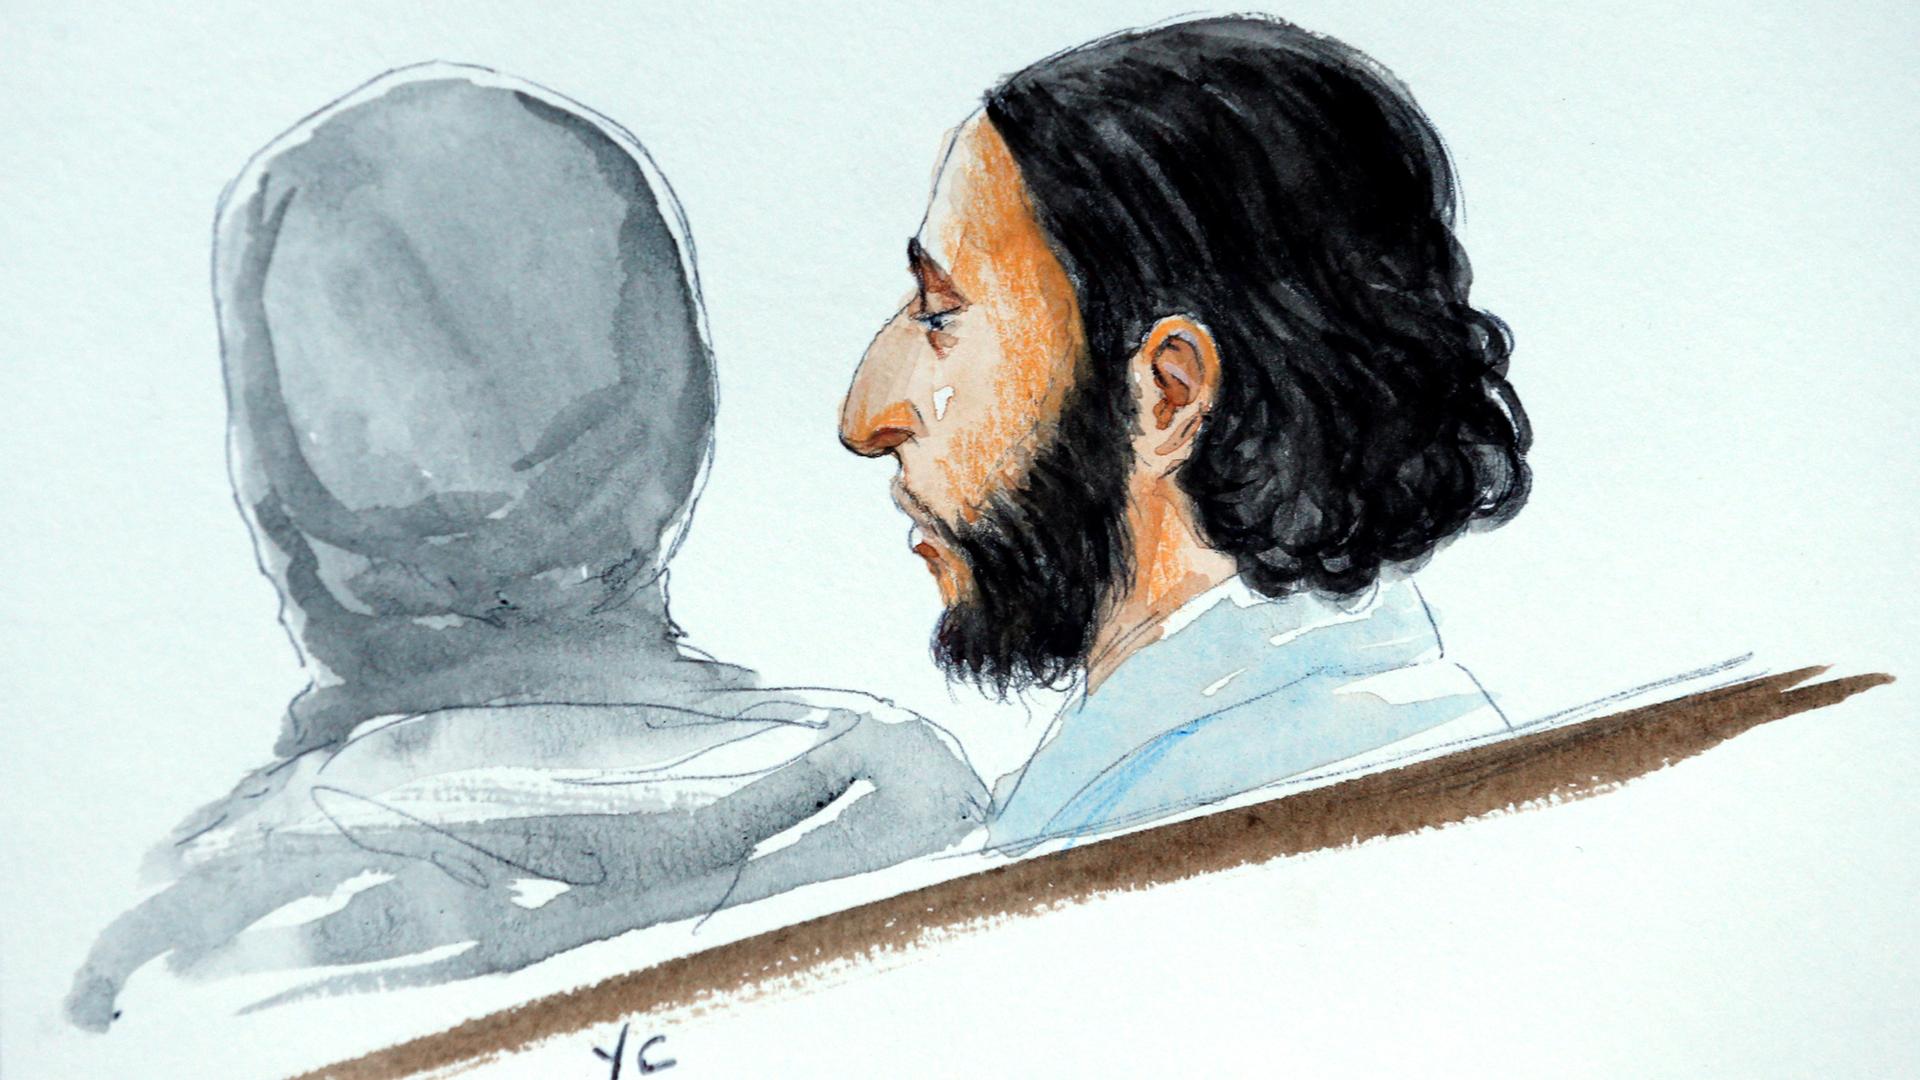 A court artist drawing shows Salah Abdeslam, one of the suspects in the 2015 ISIS attacks in Paris, in court during his trial in Brussels, Belgium.